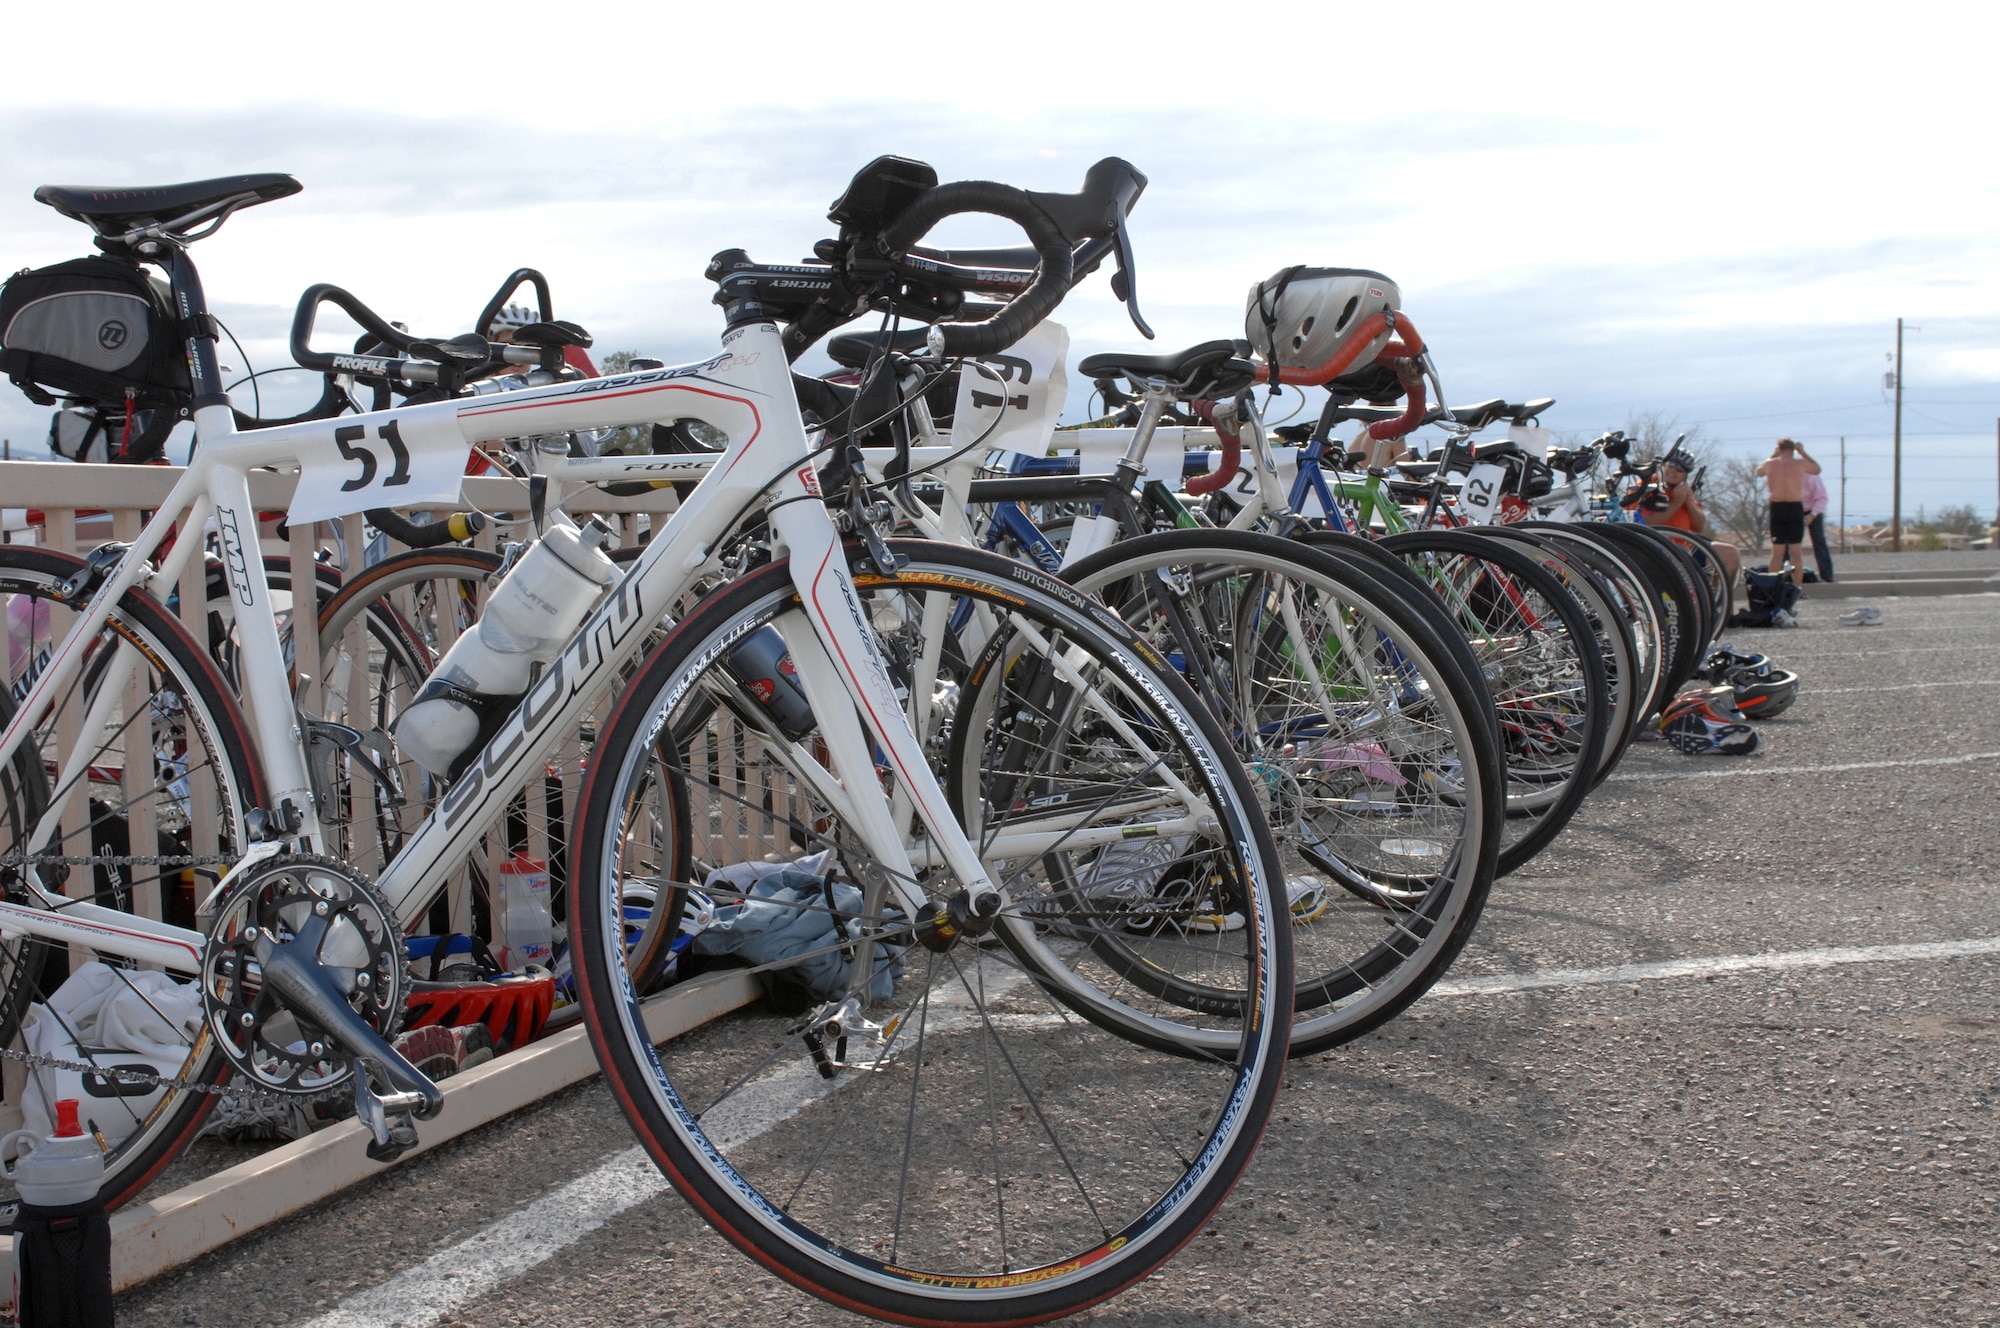 The bicycles of more than 60 athletes sit at the Aquatic Center at Holloman Air Force Base, N.M., October 12, during the annual Triathlon. The athletes ran 5K, biked 30K and swam 700 meters to complete the race. (U.S. Air Force photo/Airman Sondra M. Escutia)